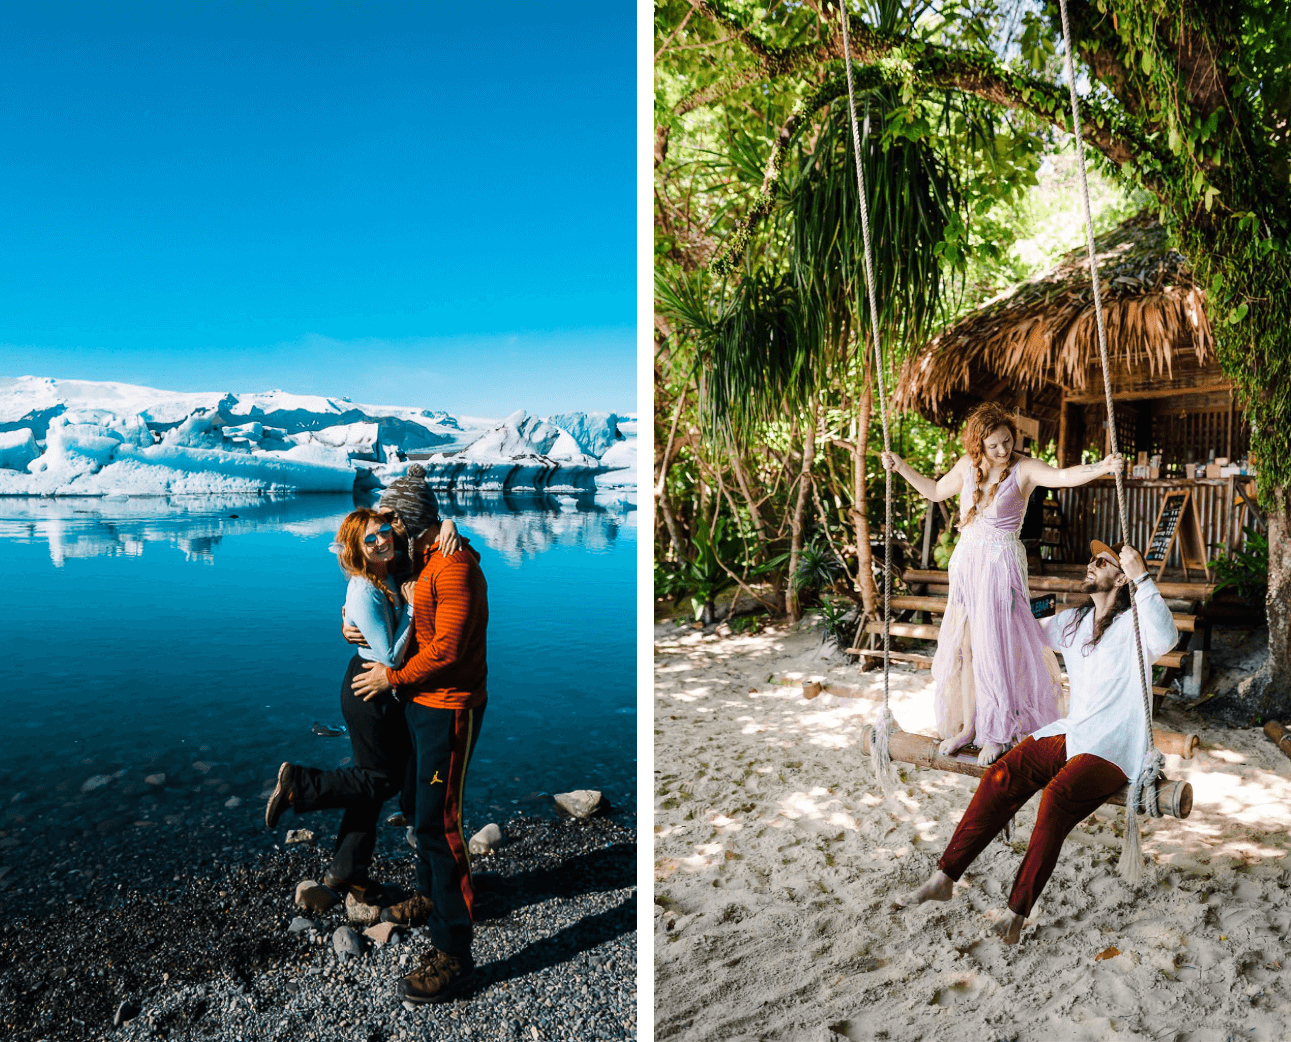 2 photos: 1) a man and woman embrace with water and a glacier in the background 2) a man and woman on a large swing in the jungle